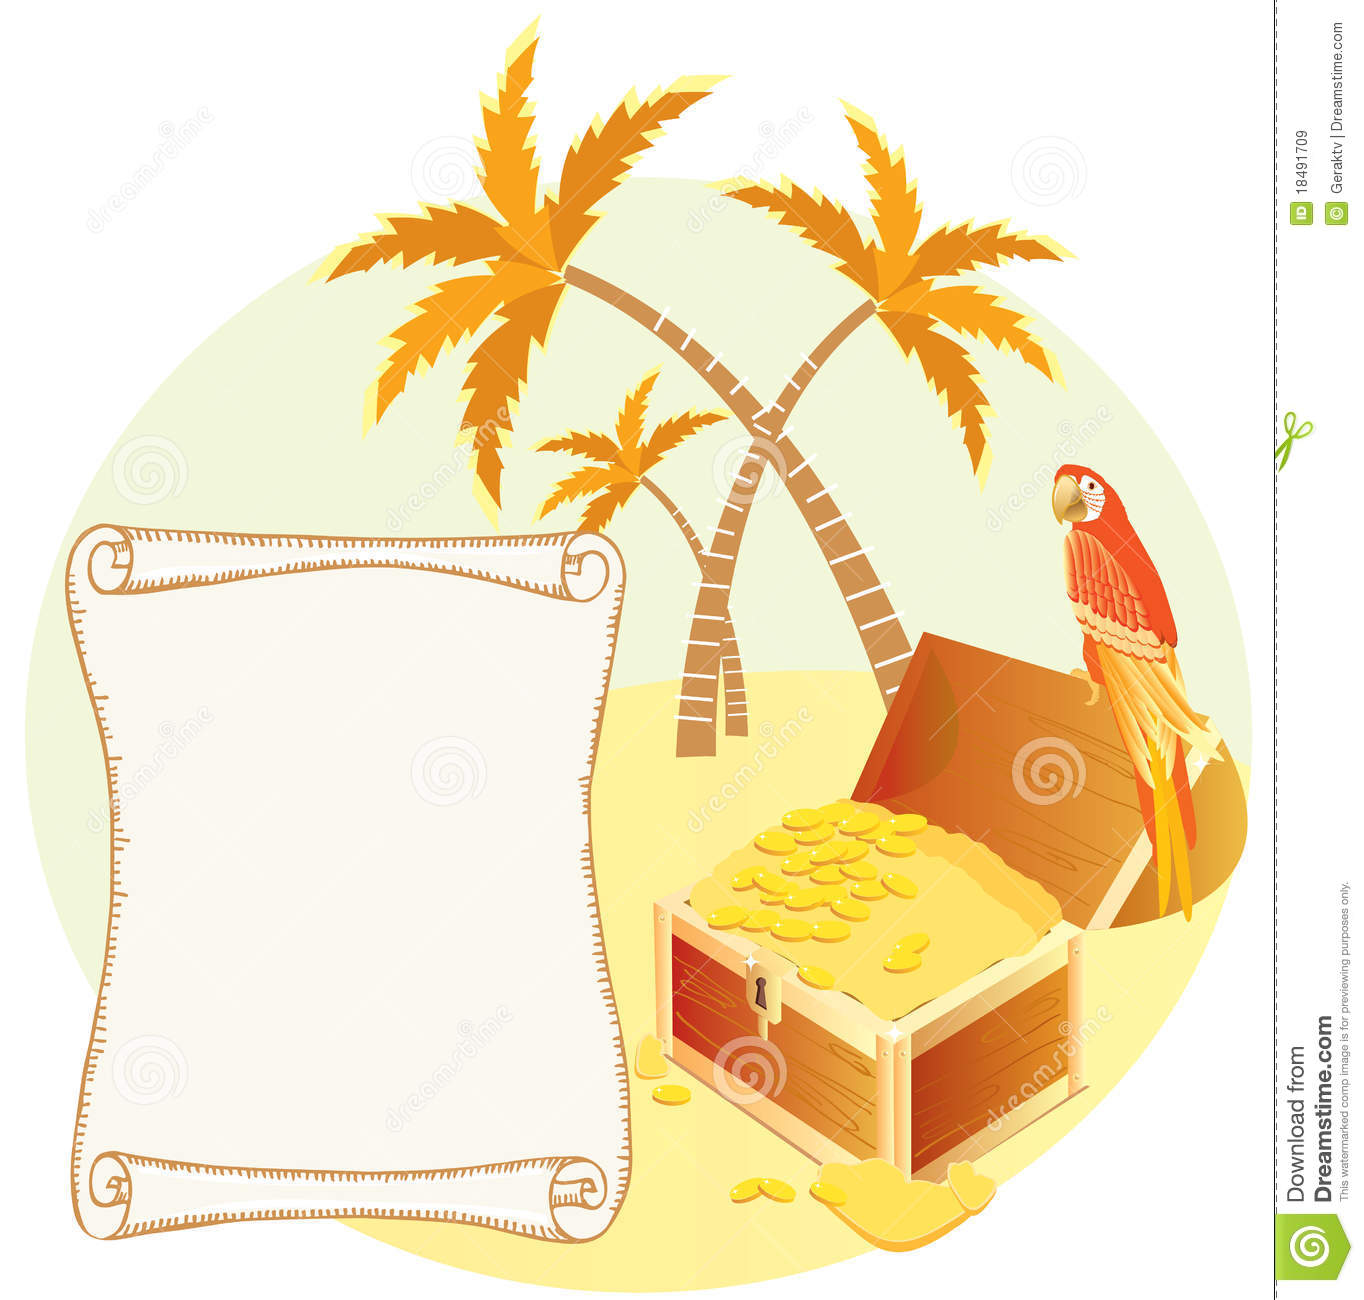 Pirate S Treasure With Parrot And Palms  Royalty Free Stock Images